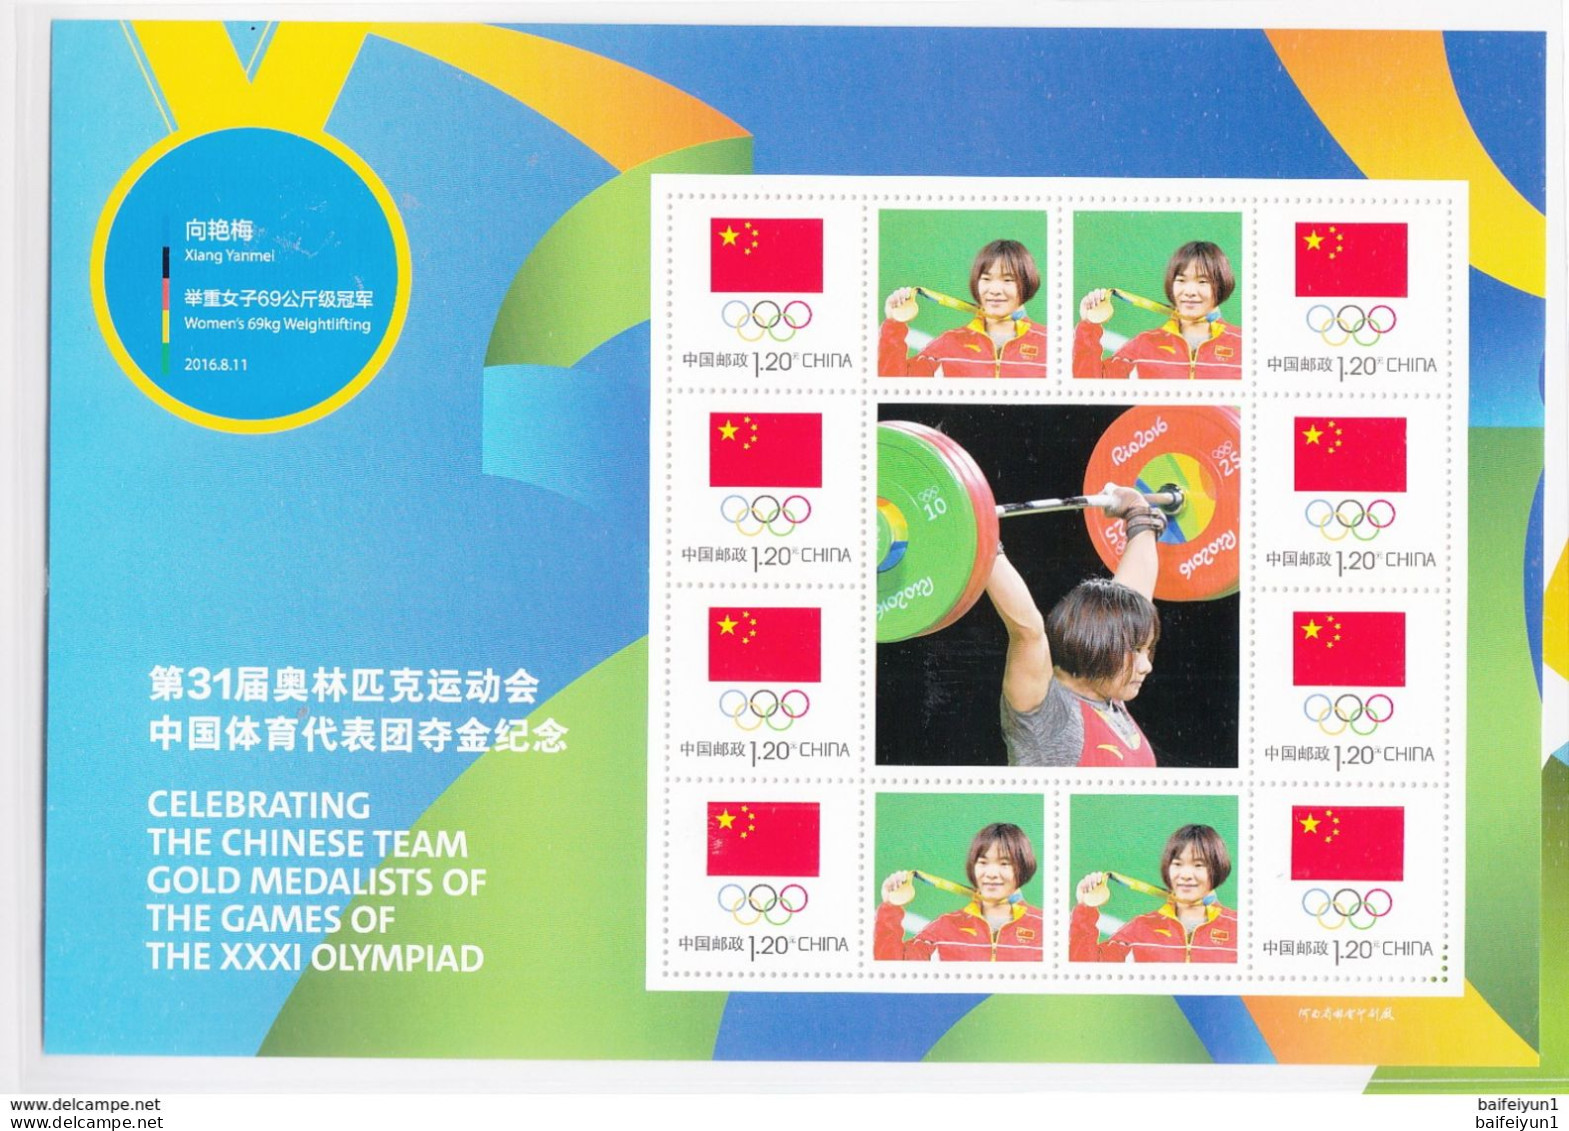 2016 China XXXI Rio Olympic Game  China Gold Medal winner Special S/S Stamp 26 sets full sheet